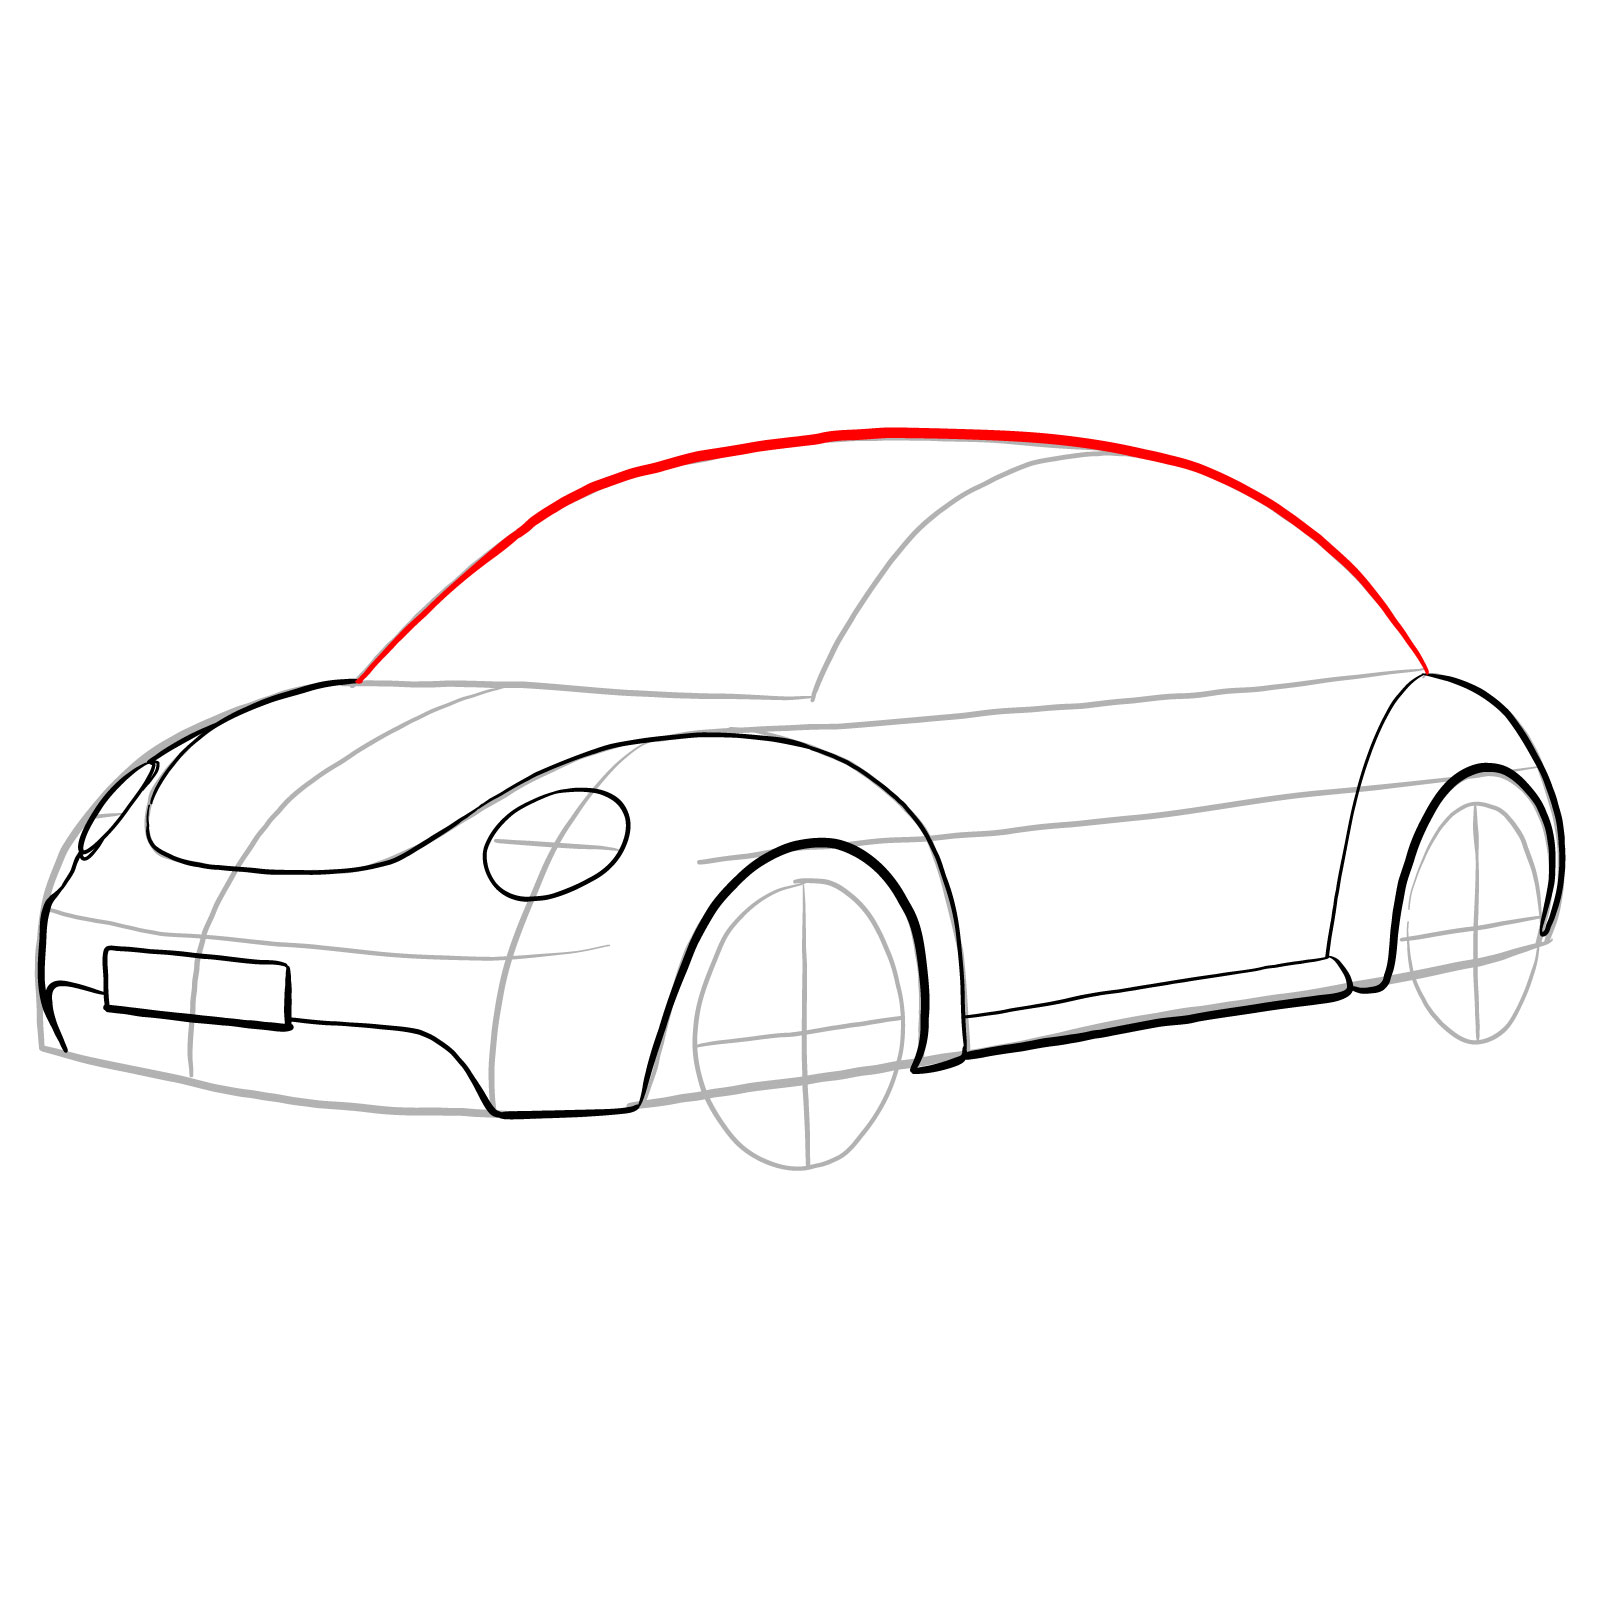 How to draw Volkswagen New Beetle - step 13